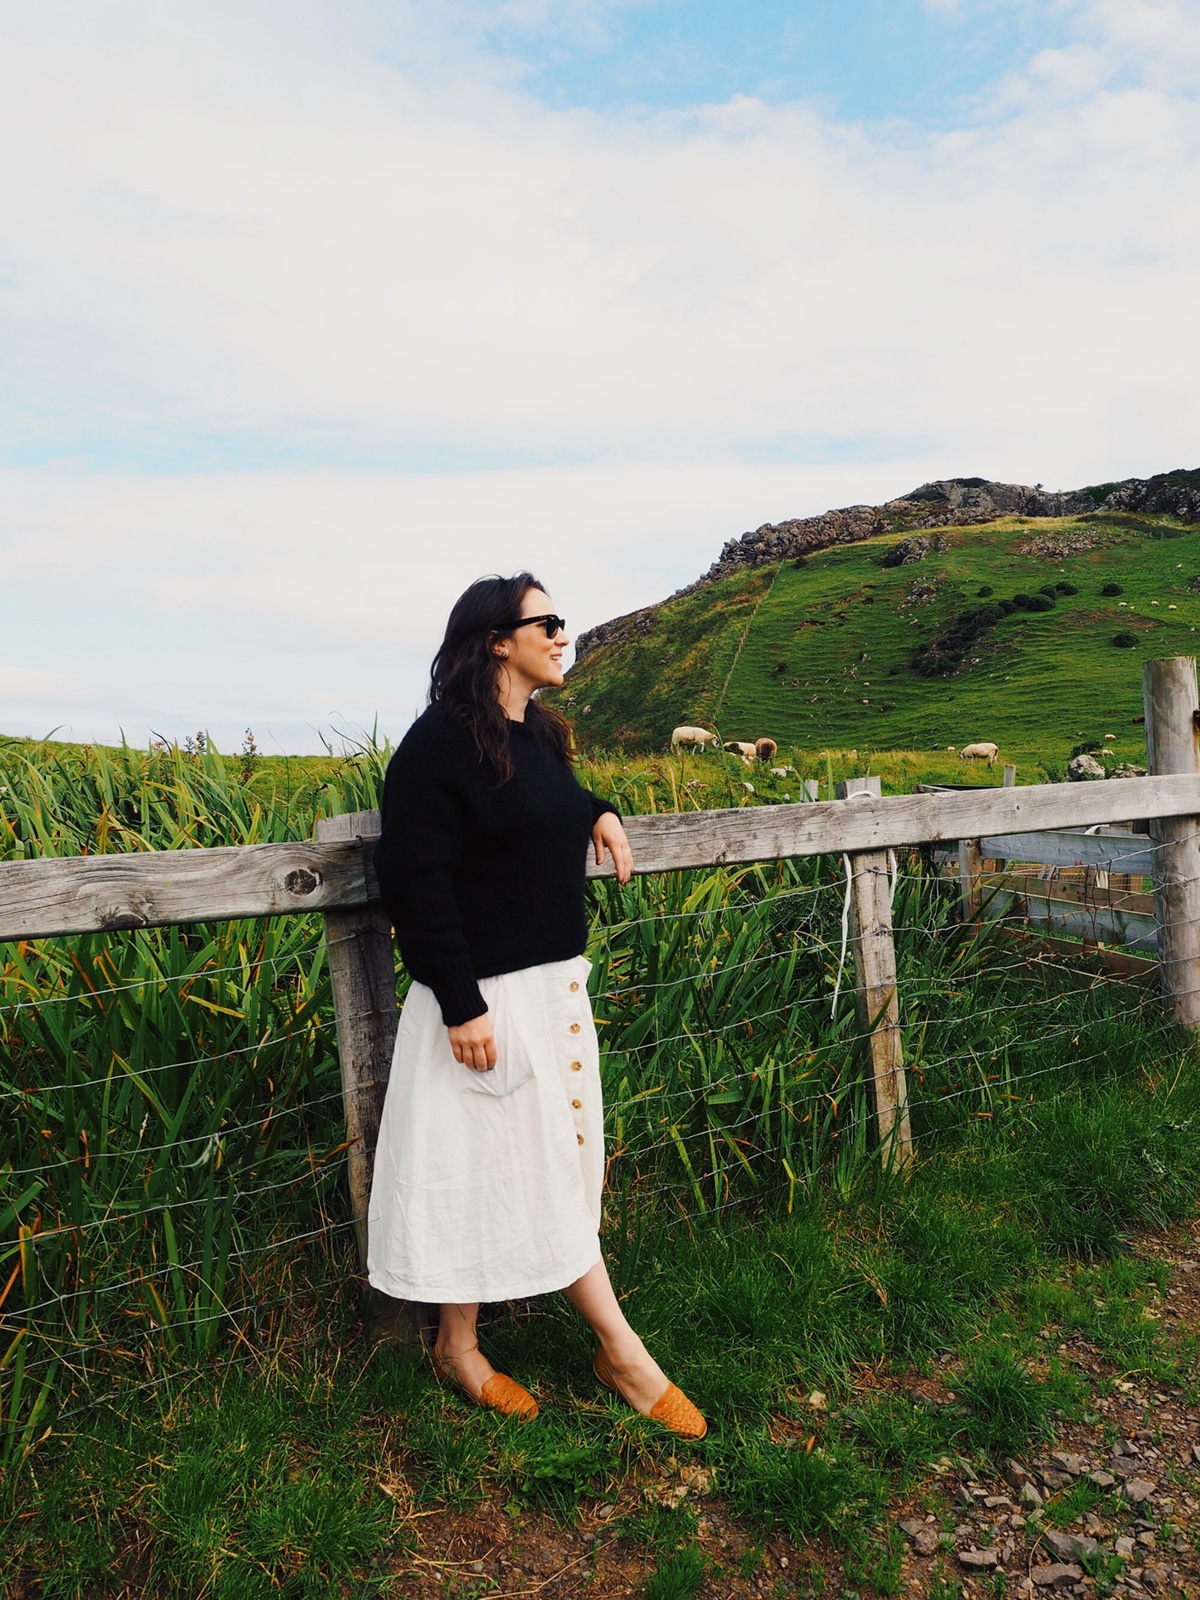 the stunning coastline and countryside of the british isles | a visual diary on coco kelley